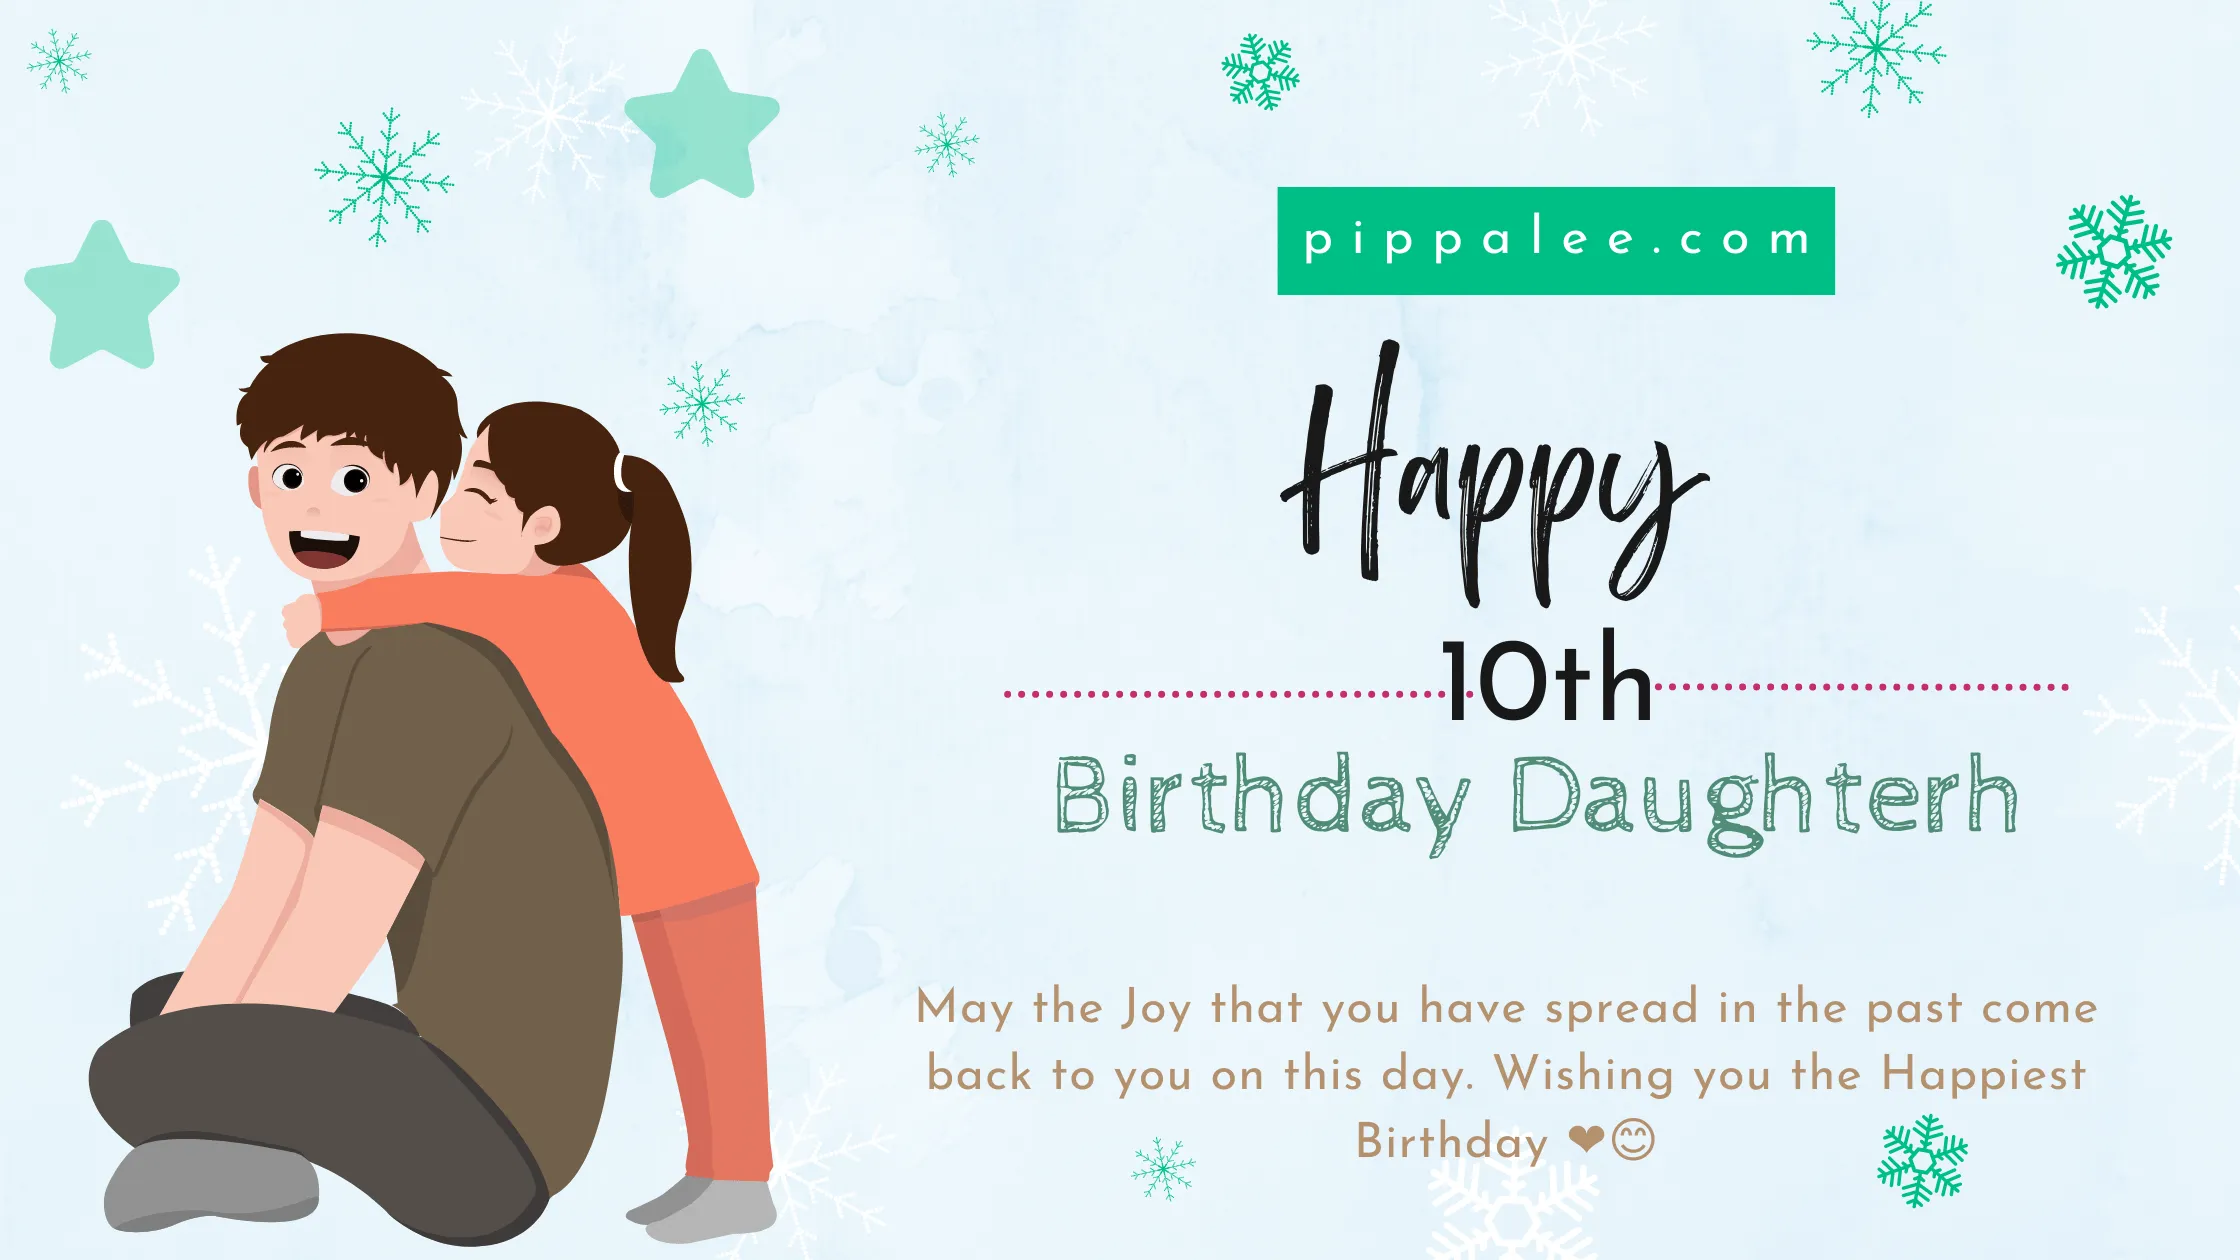 Happy 10th Birthday Daughter - Wishes & Messages